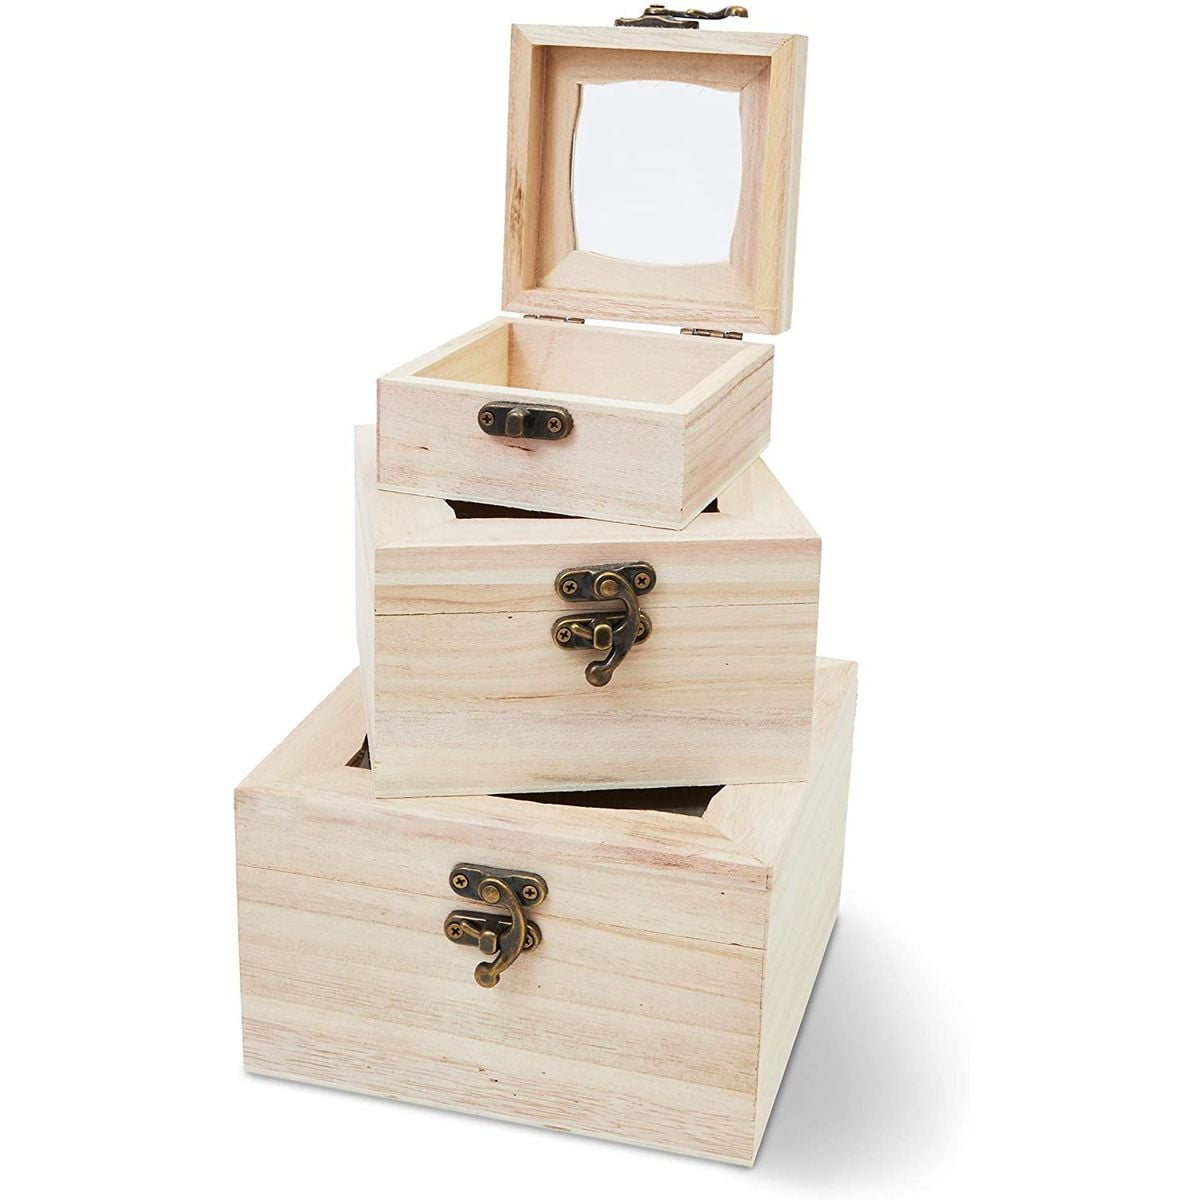 Heart Shaped Wood Jewelry Storage Box Vintage Wooden Gift Box DIY Wood Case 